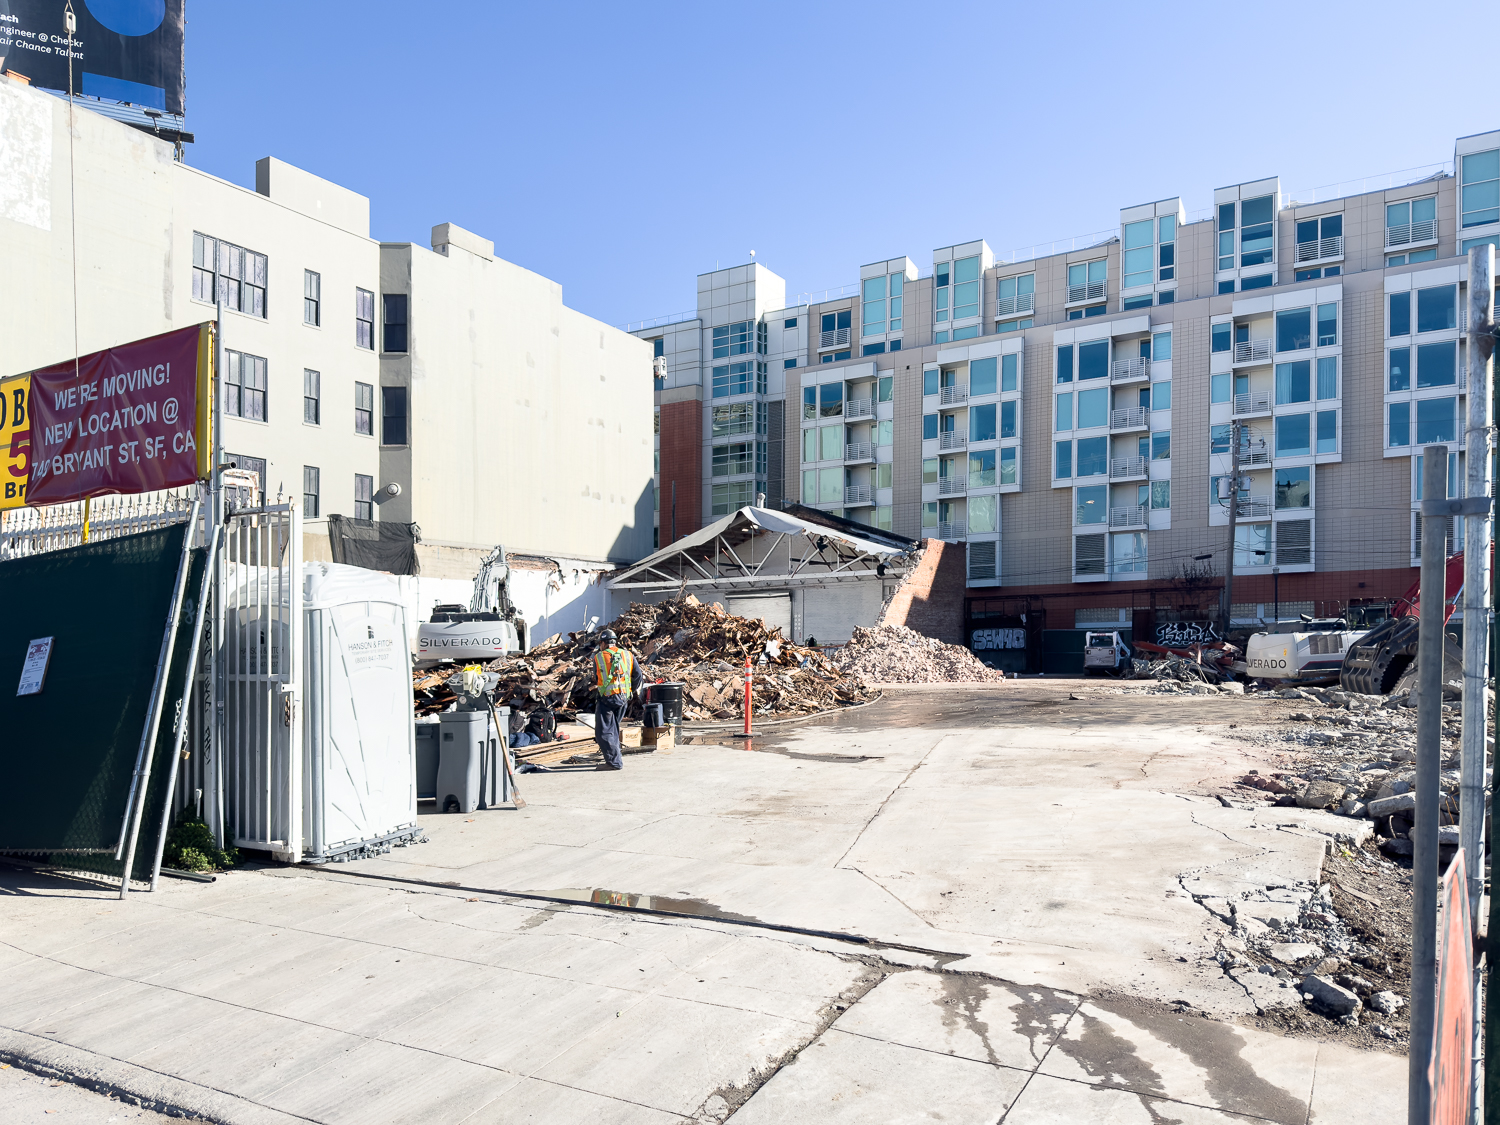 Demolition nearly complete for the single-story brick structure at 555 Bryant Street, image by author